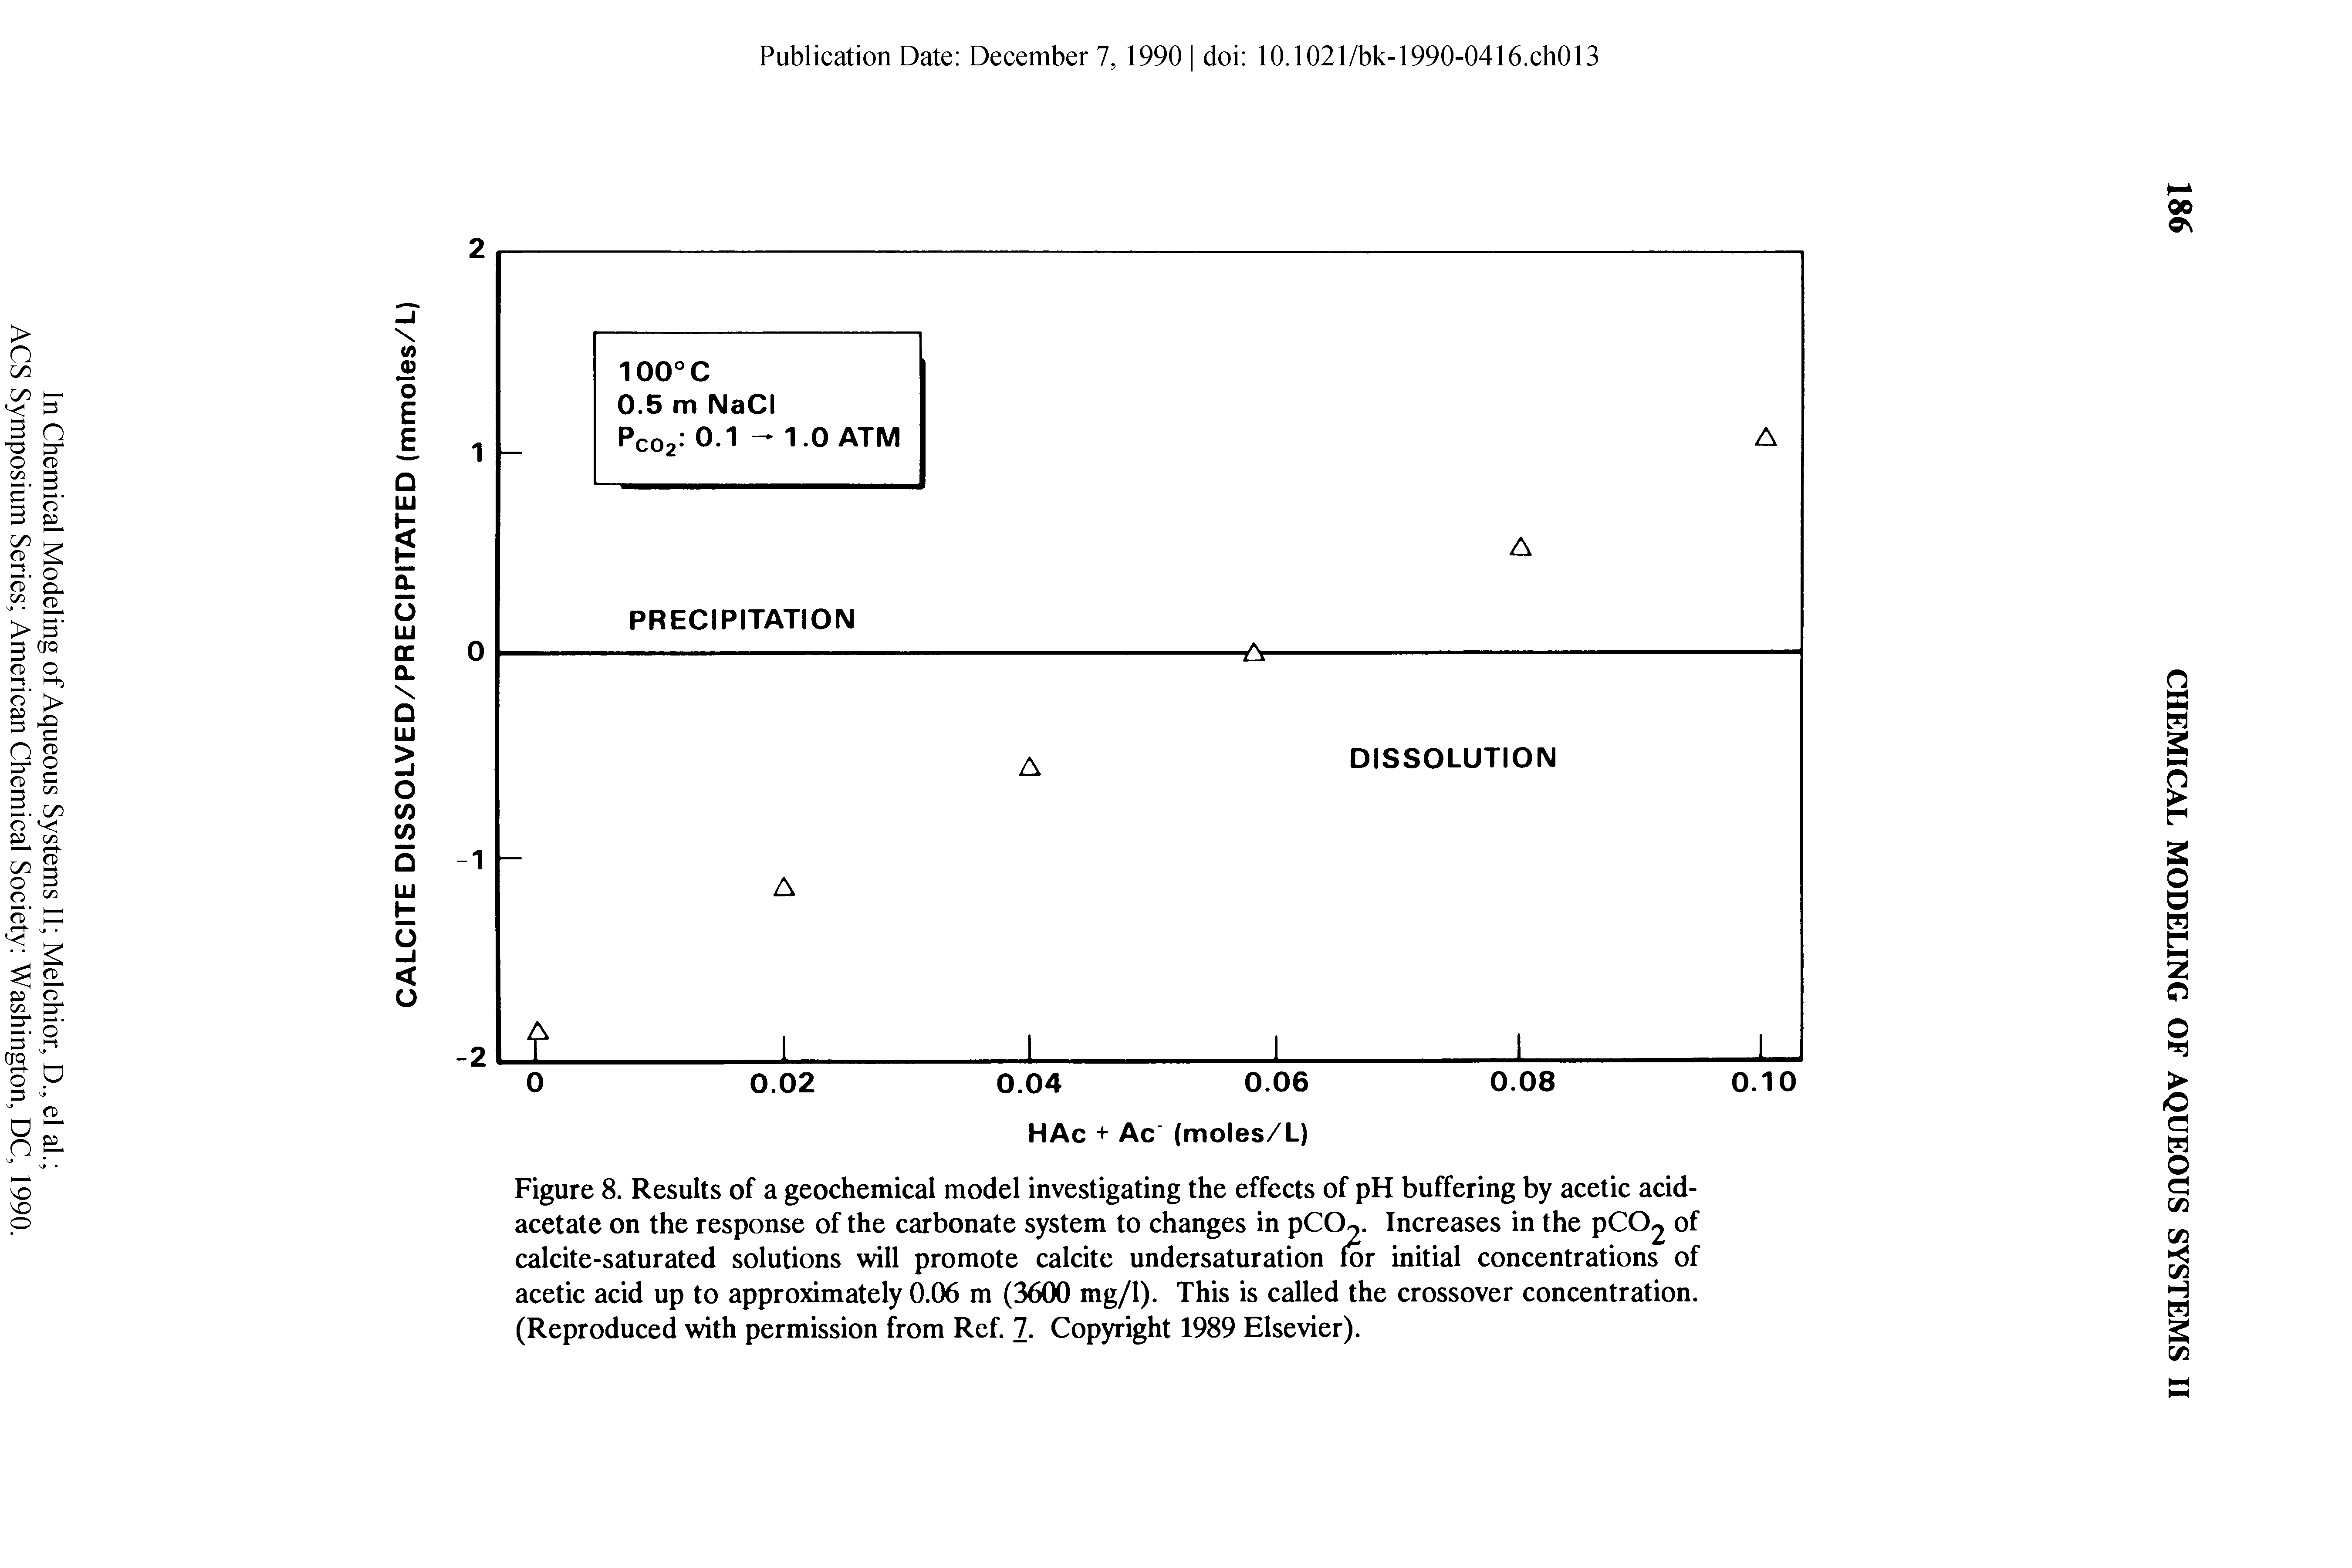 Figure 8. Results of a geochemical model investigating the effects of pH buffering by acetic acid-acetate on the response of the carbonate system to changes in pCO. Increases in the pC02 of calcite-saturated solutions will promote calcite undersaturation for initial concentrations of acetic acid up to approximately 0.06 m (3600 mg/I). This is called the crossover concentration. (Reproduced with permission from Ref. 7. Copyright 1989 Elsevier).